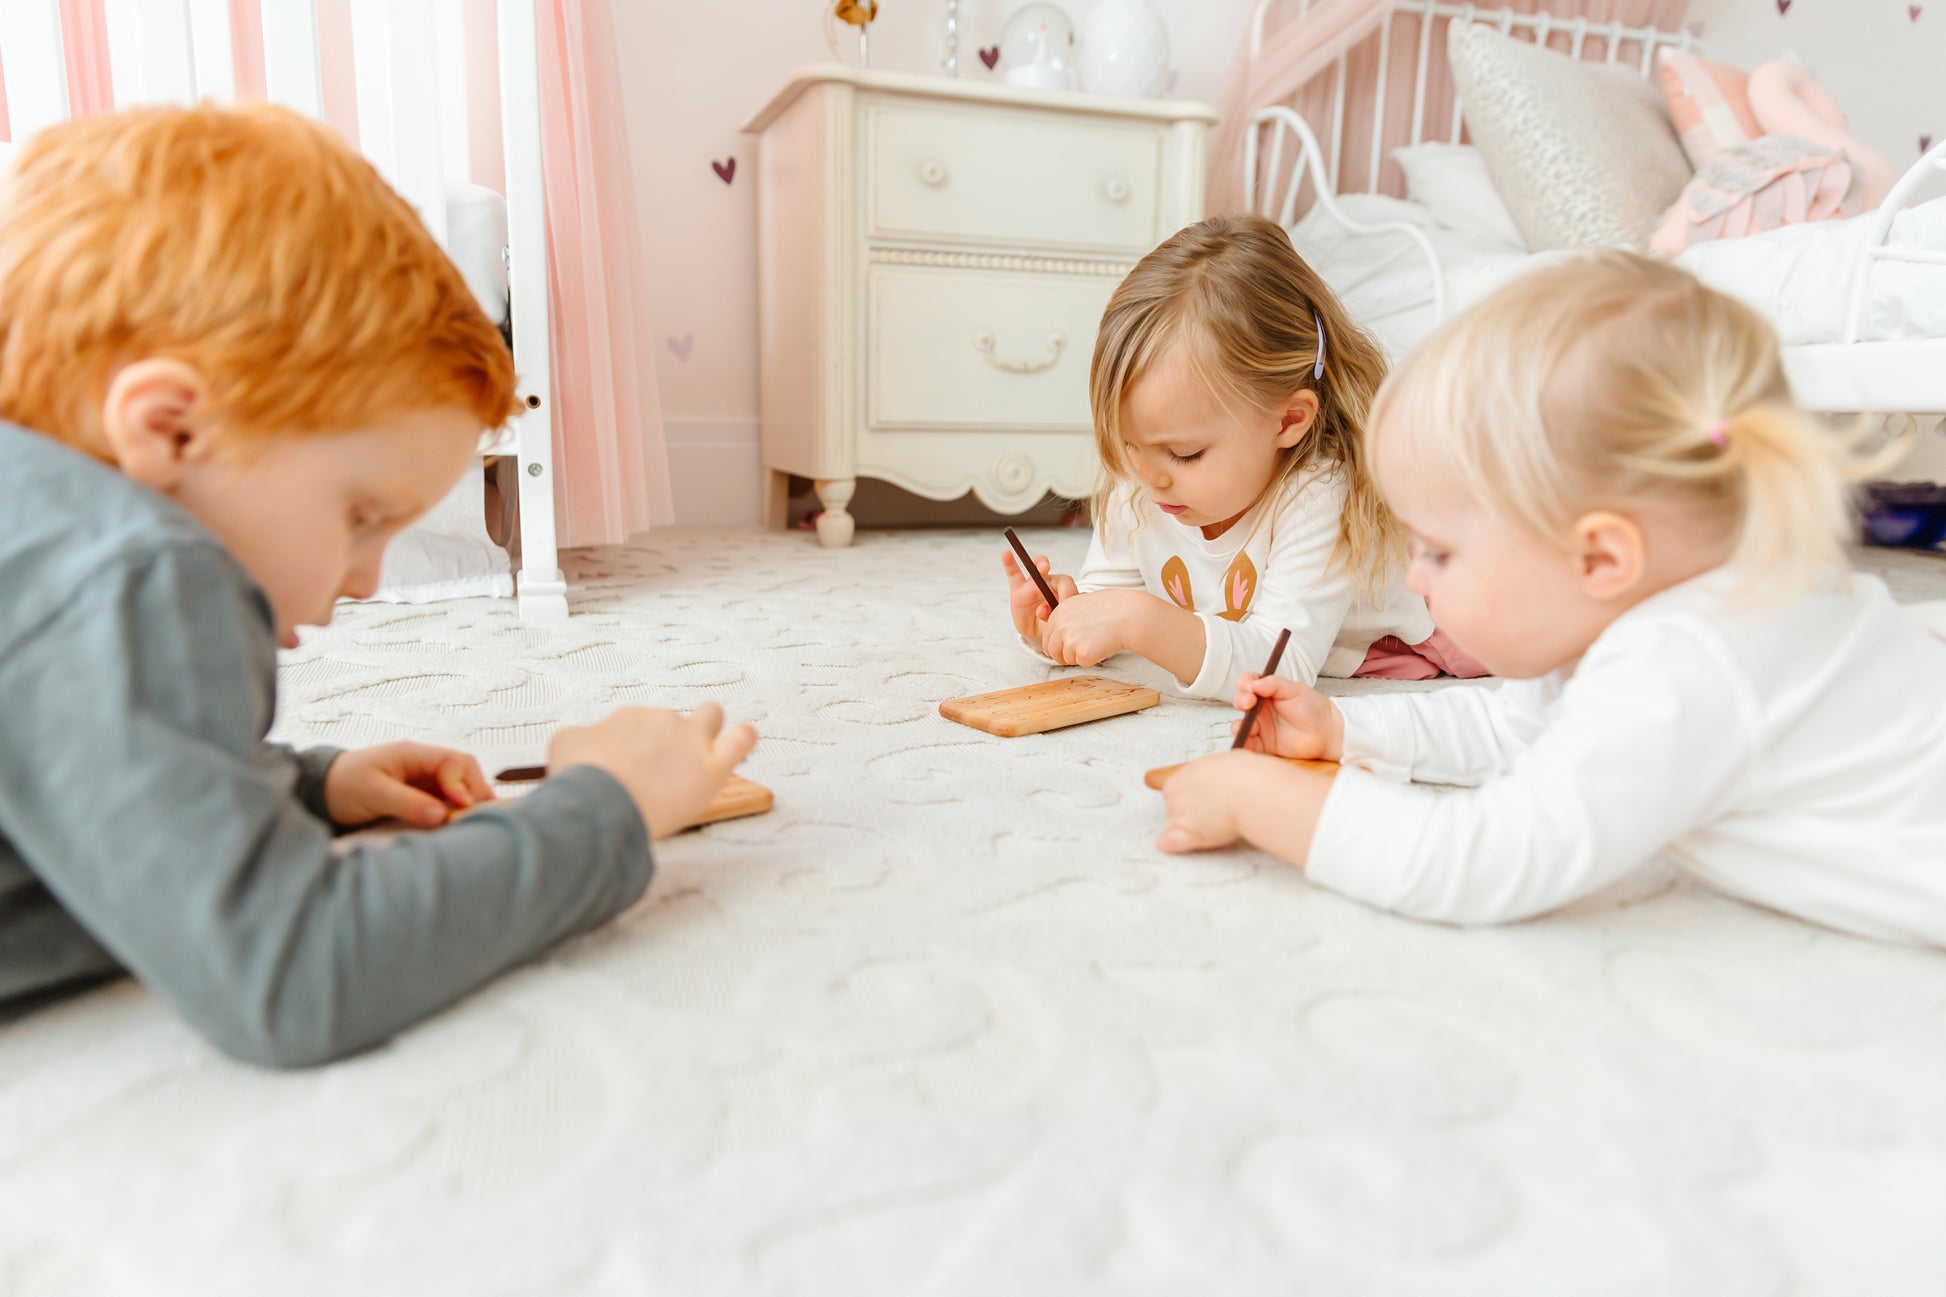 Three little kids lying on the floor, engrossed in play, using iDoddle to trace and write both the alphabet and numbers. Their playful engagement with the wooden toy fosters learning and creativity as they explore letters, numbers, and colors, all while enjoying the camaraderie of shared playtime. This interactive activity not only enhances their cognitive development but also strengthens their friendship and social skills.